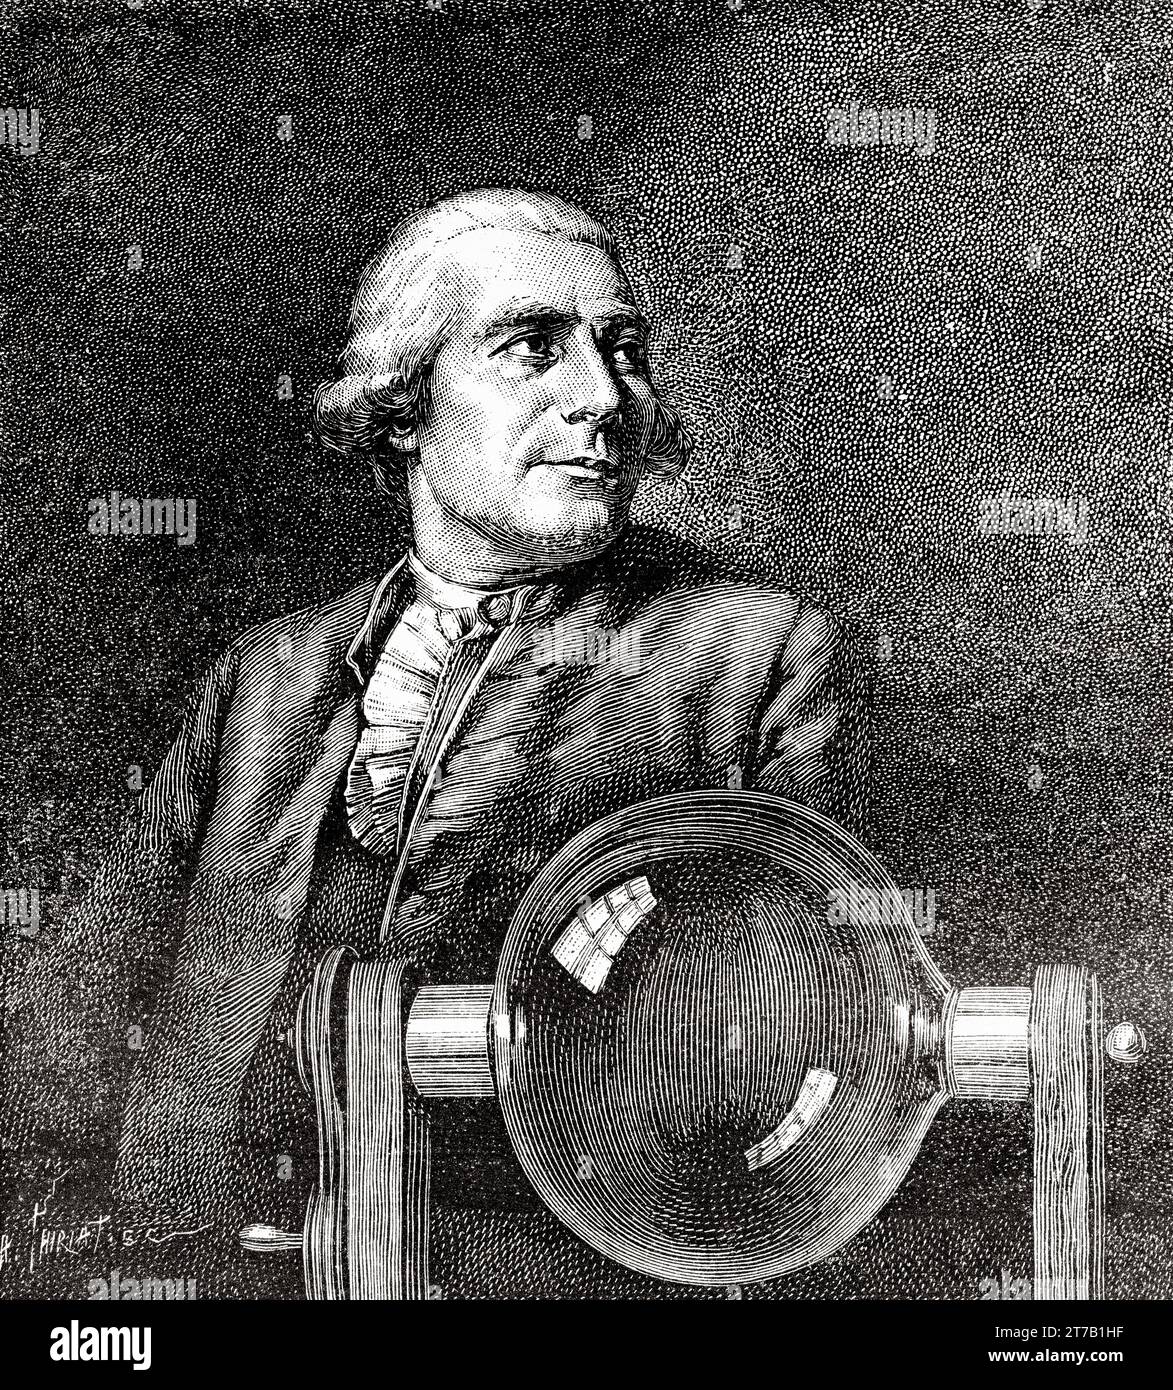 Portrait of Joseph Michel Montgolfier (1740-1810) Aviation pioneer, balloonist and paper manufacturer from the commune Annonay in Ardèche, France. Old illustration from La Nature 1887 Stock Photo